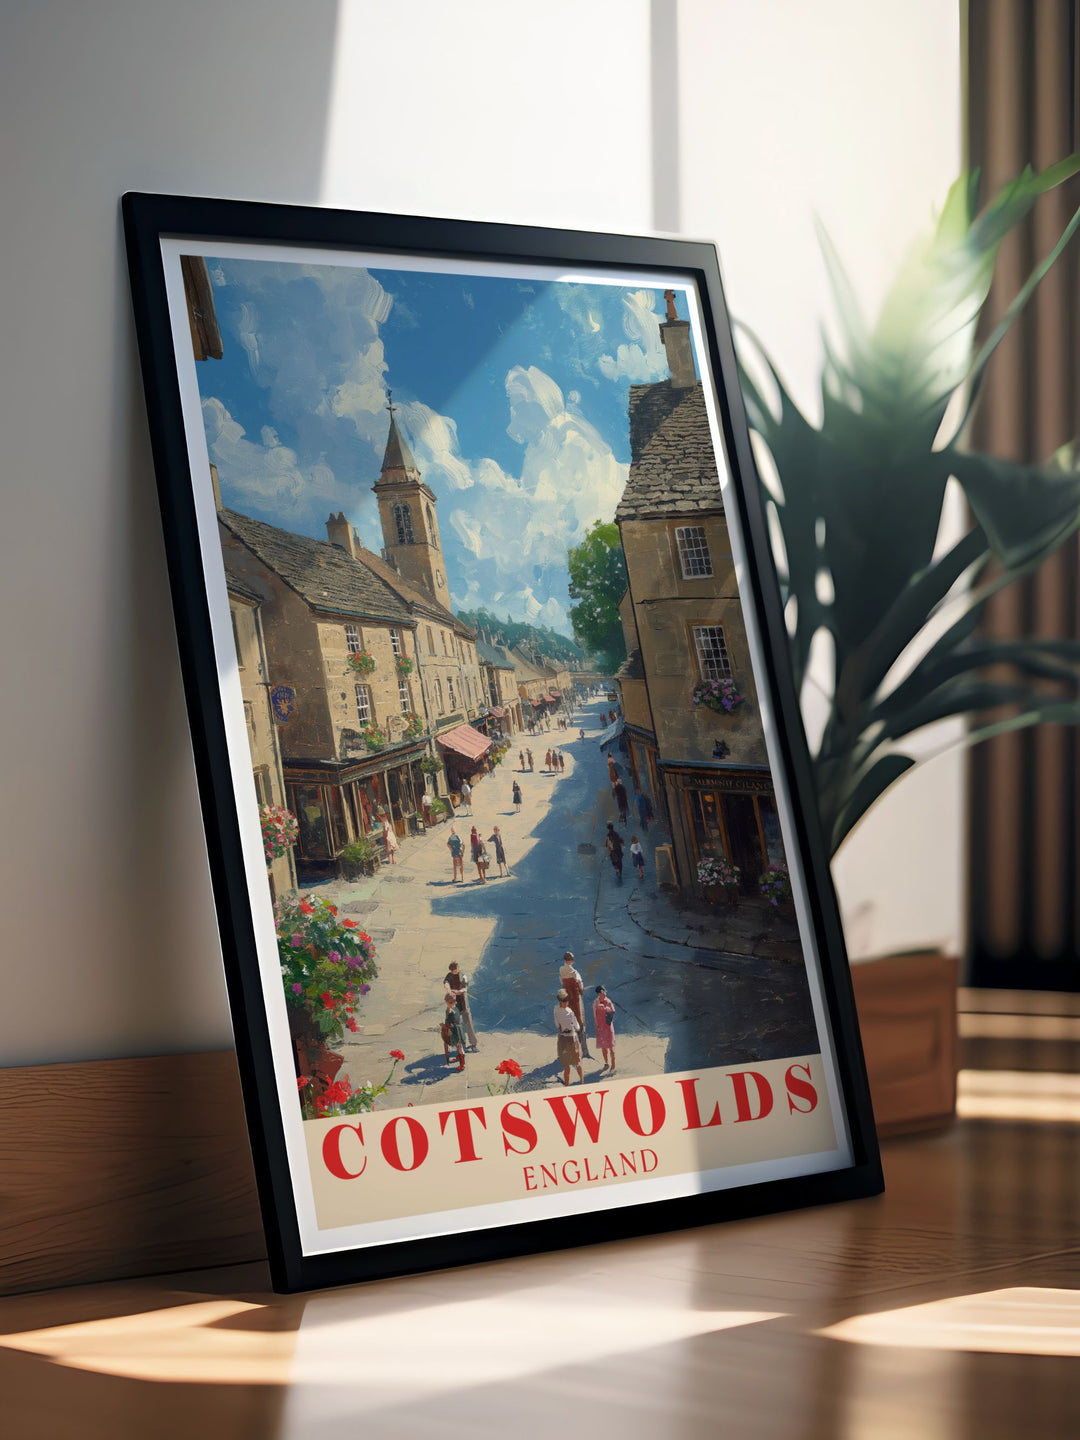 Highlighting the serene vistas of the Cotswolds and the bustling atmosphere of Stow on the Wold Market Square, this travel poster is perfect for those who appreciate the scenic and historical richness of England.